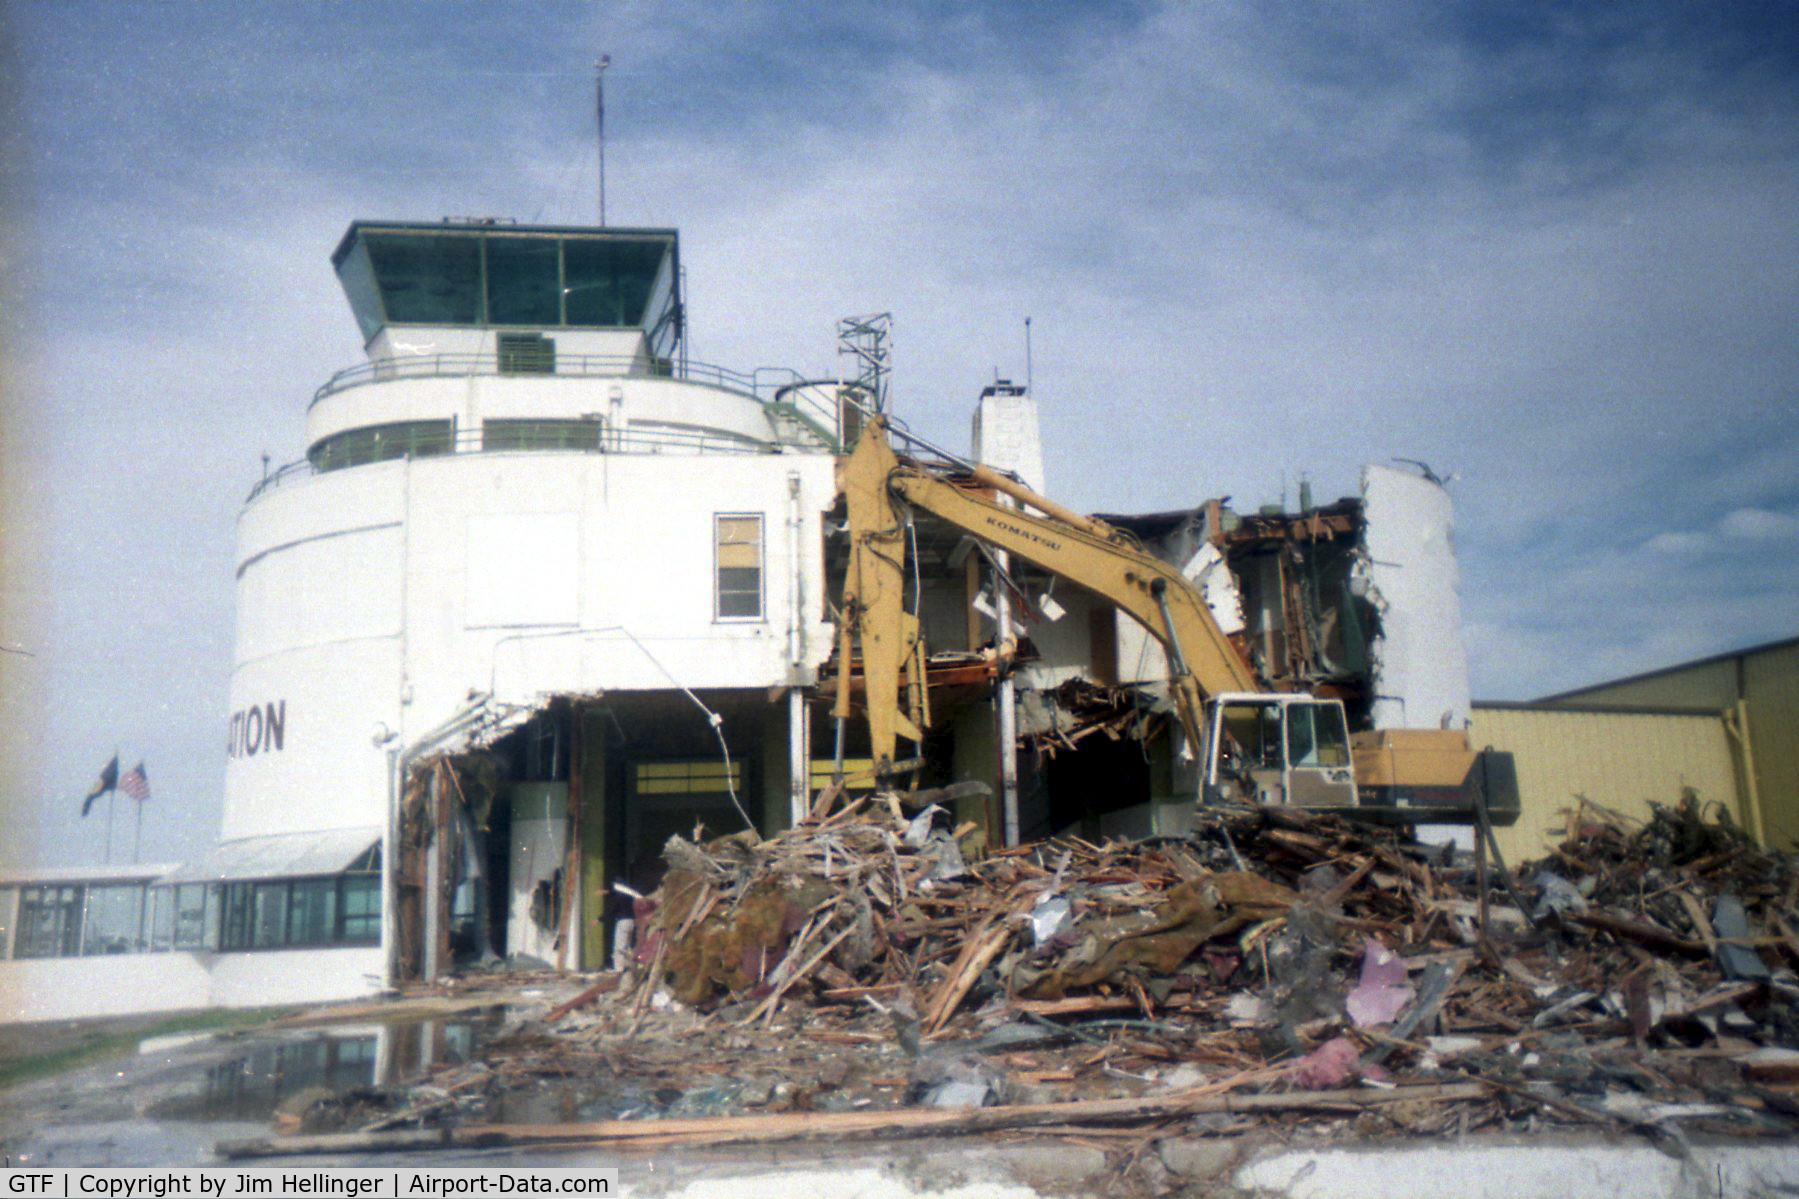 Great Falls International Airport (GTF) - Old GTF Terminal demolition, late 1990's. A restaurant called Victors once stood in the foreground attached to the terminal building. It disappeared in the 80's?